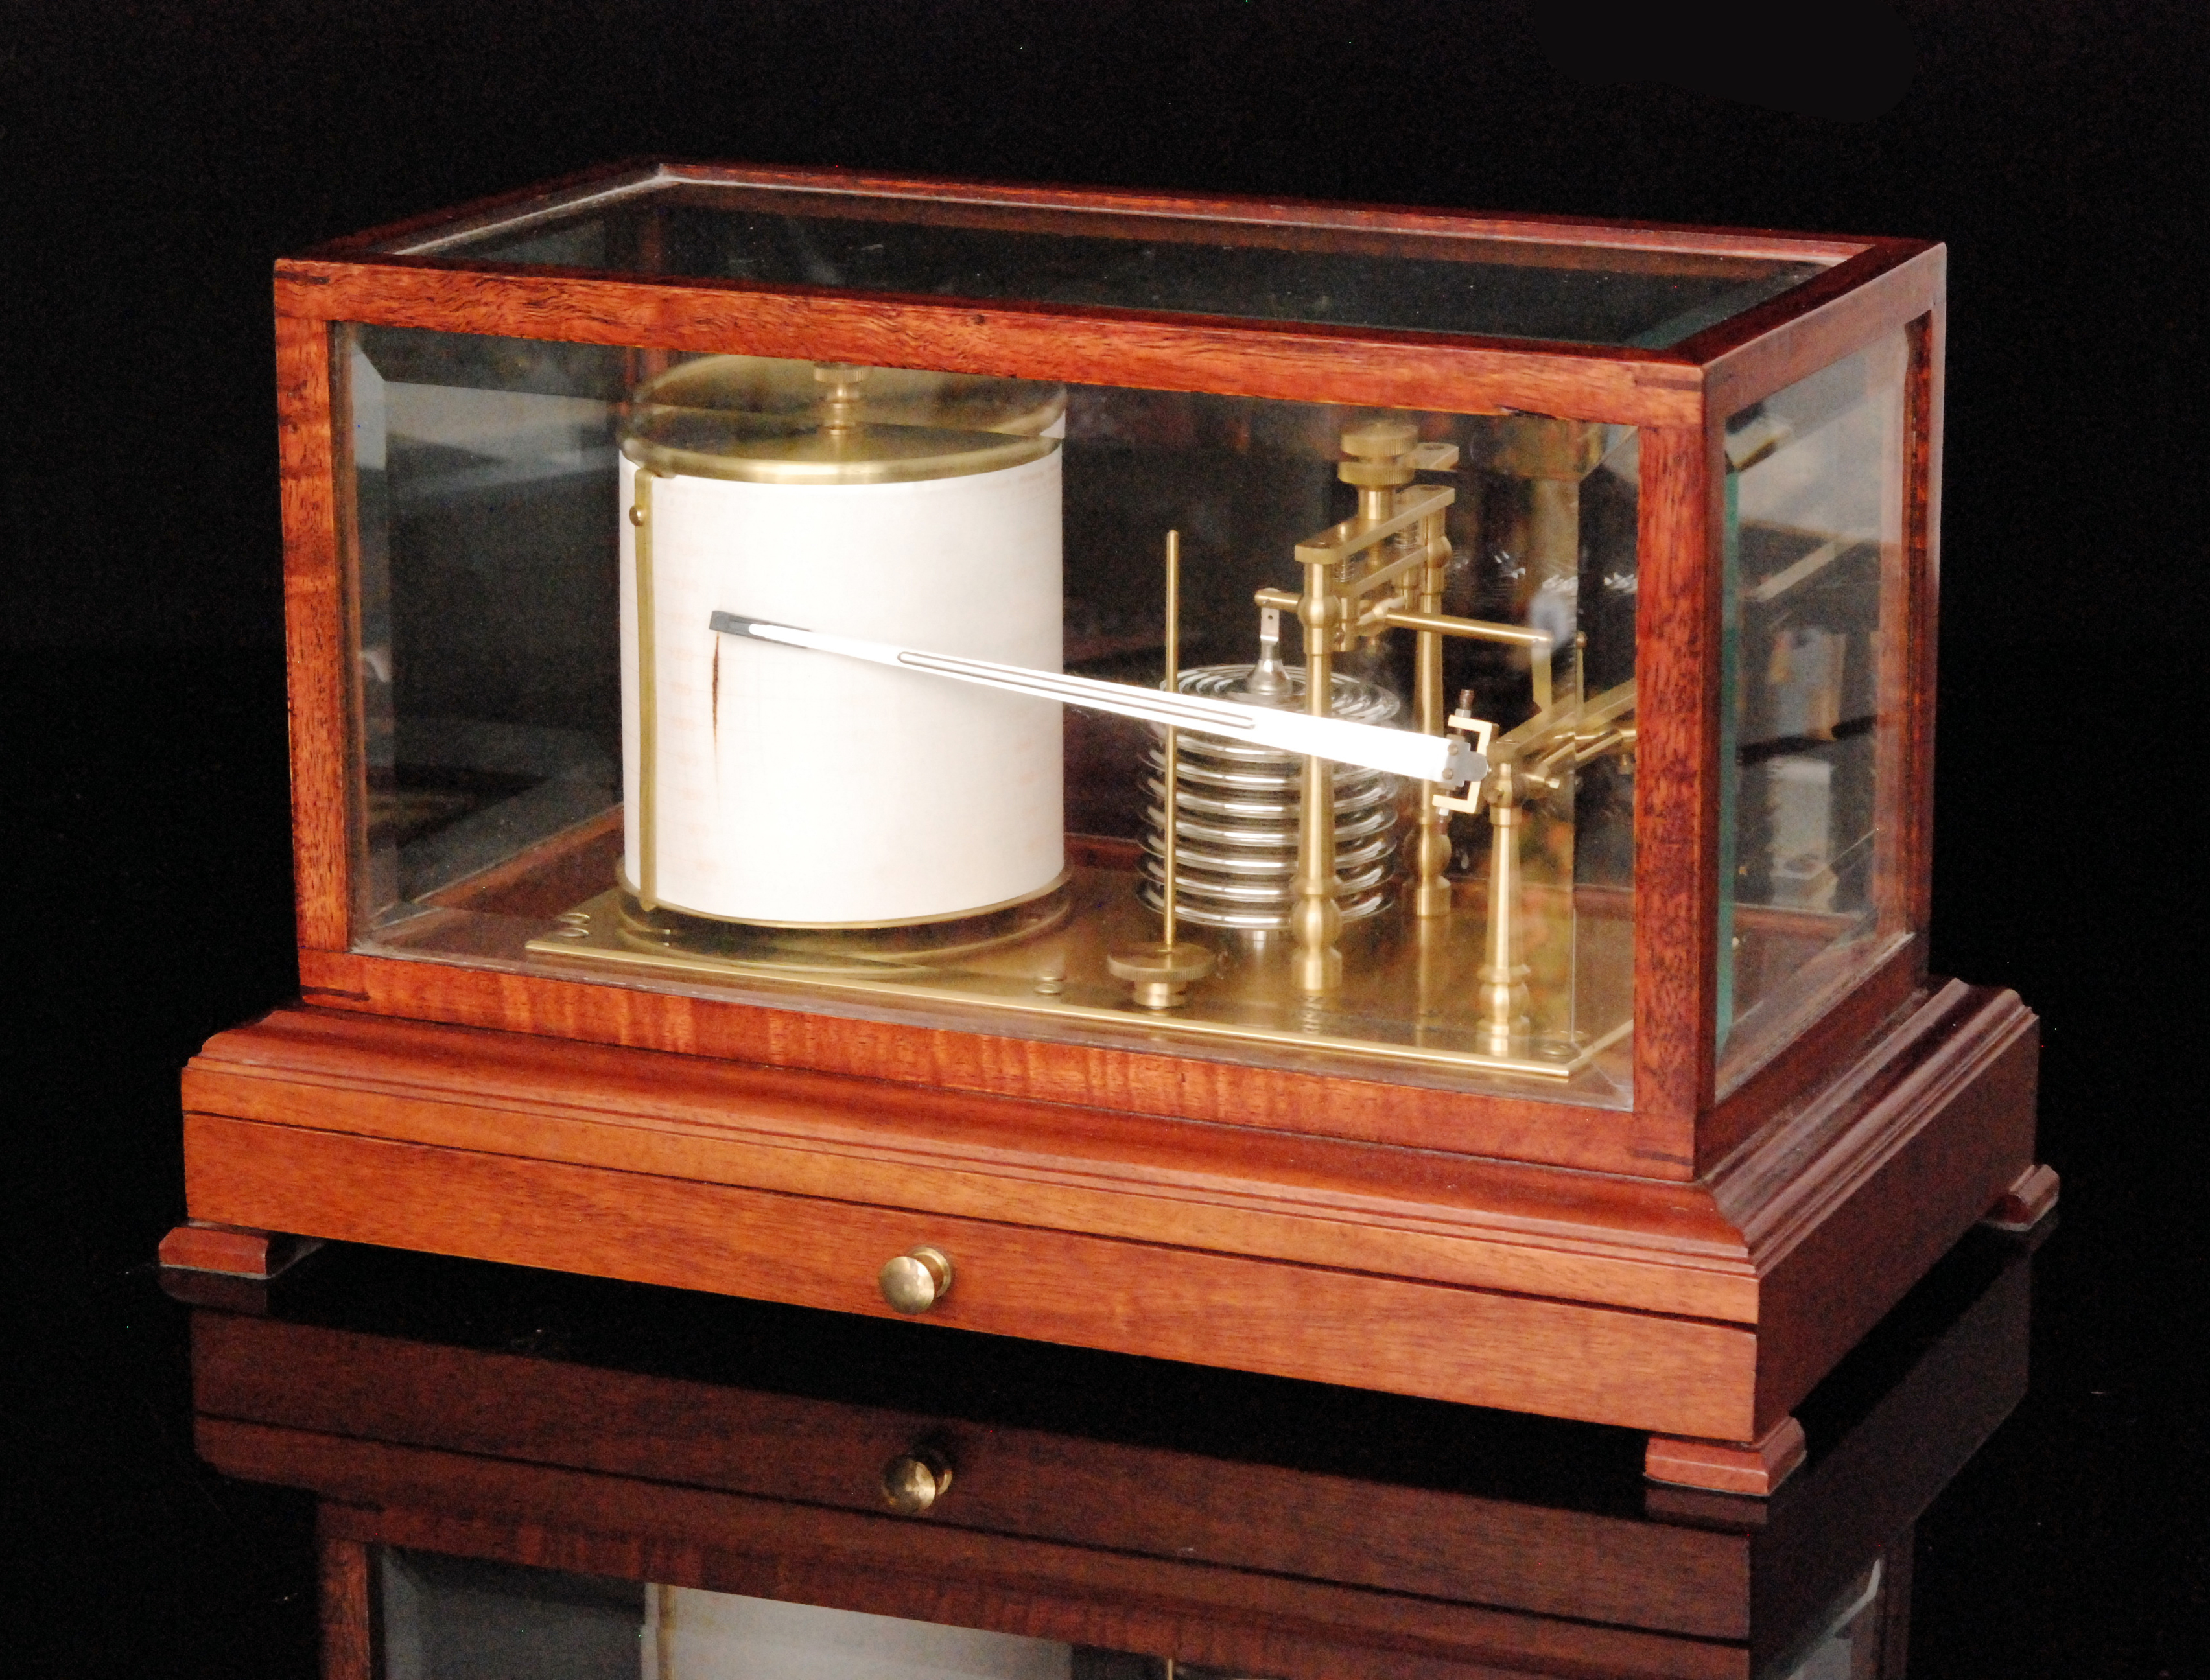 A 20th Century barograph by Thomas Armstrong and Brothers Limited Manchester No 3605 in a bevelled